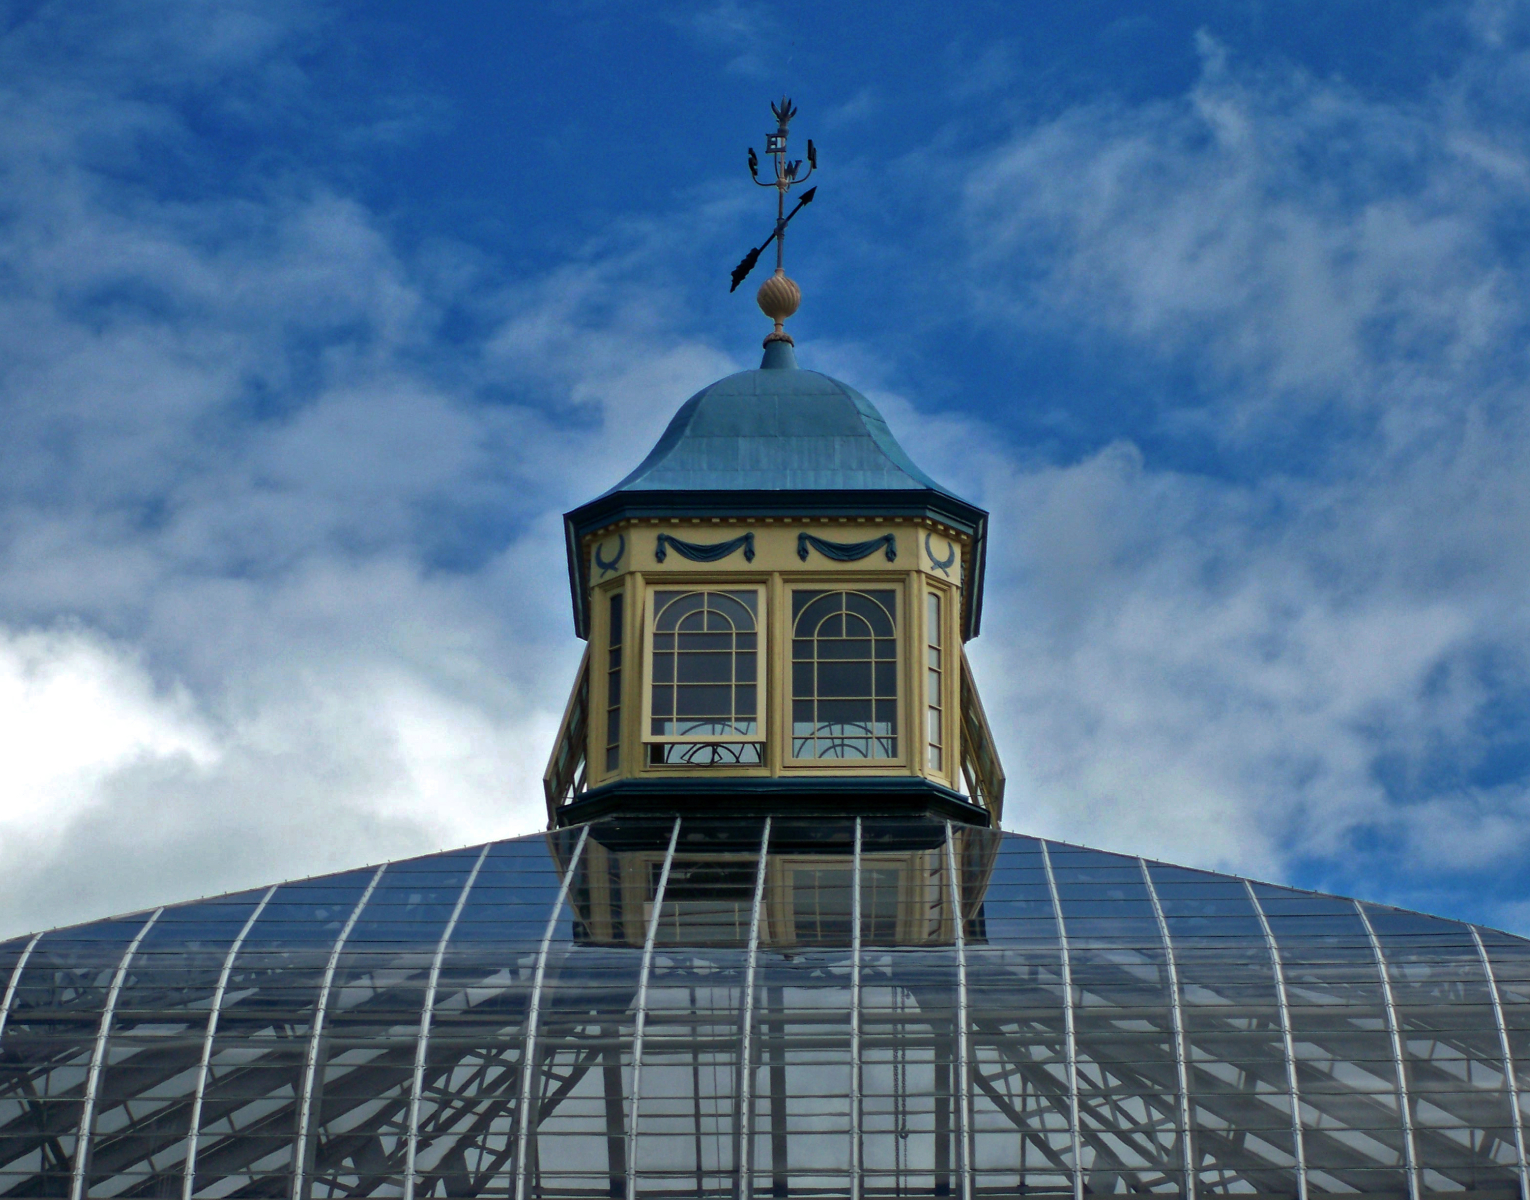 Palm House cupola and weathervane on cloudy day with a rich blue sky